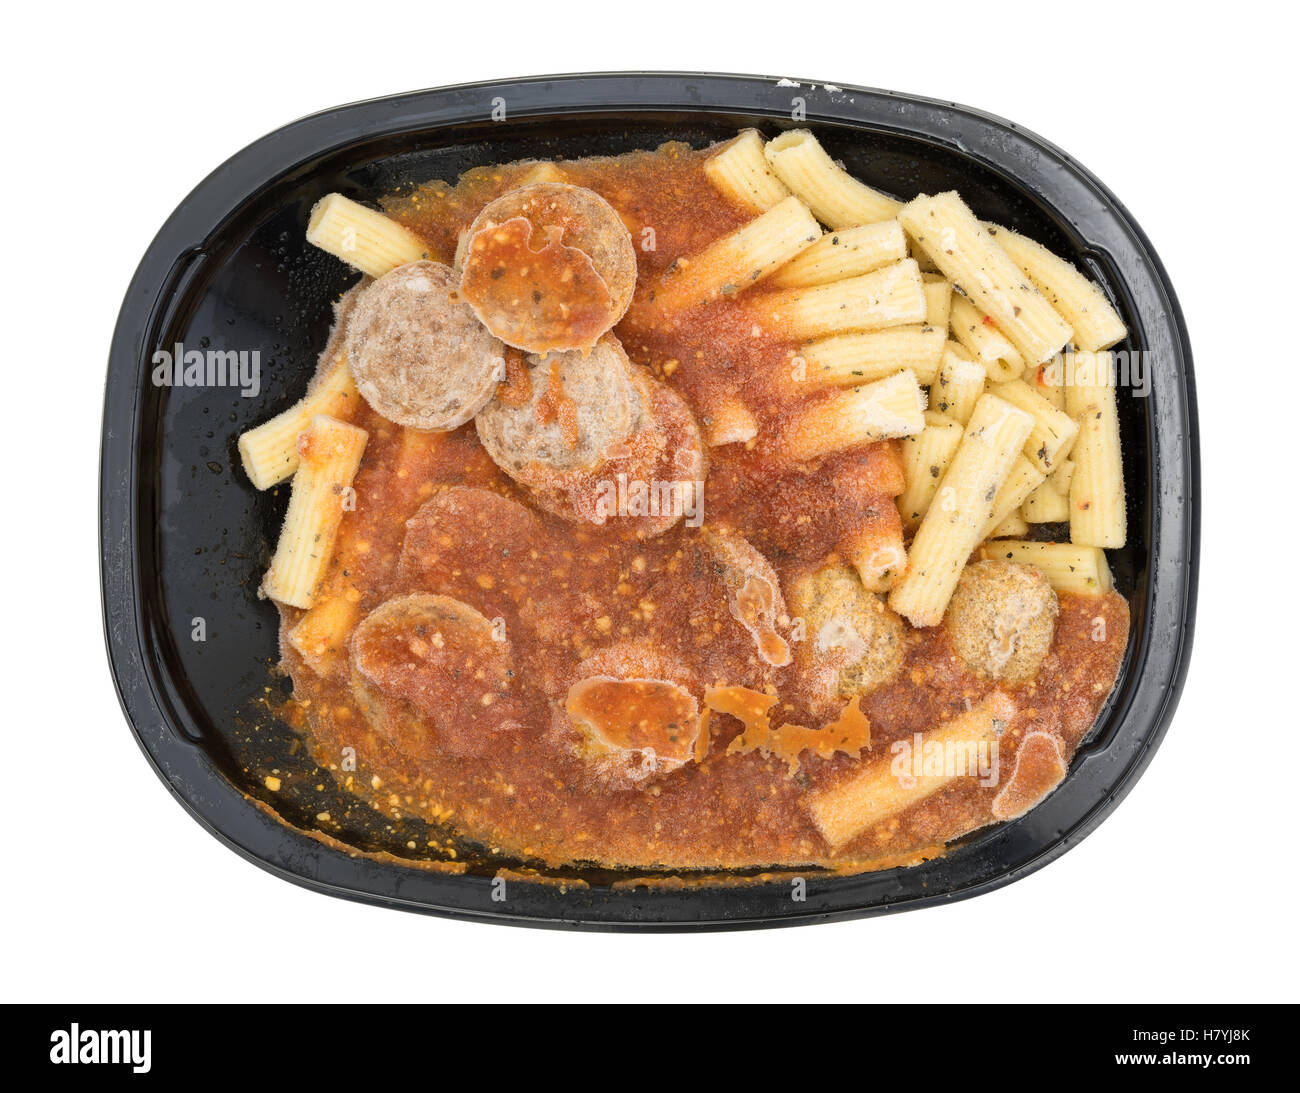 Top view of a frozen rigatoni pasta with sausage and meatballs in a marinara sauce TV dinner on a white background. Stock Photo